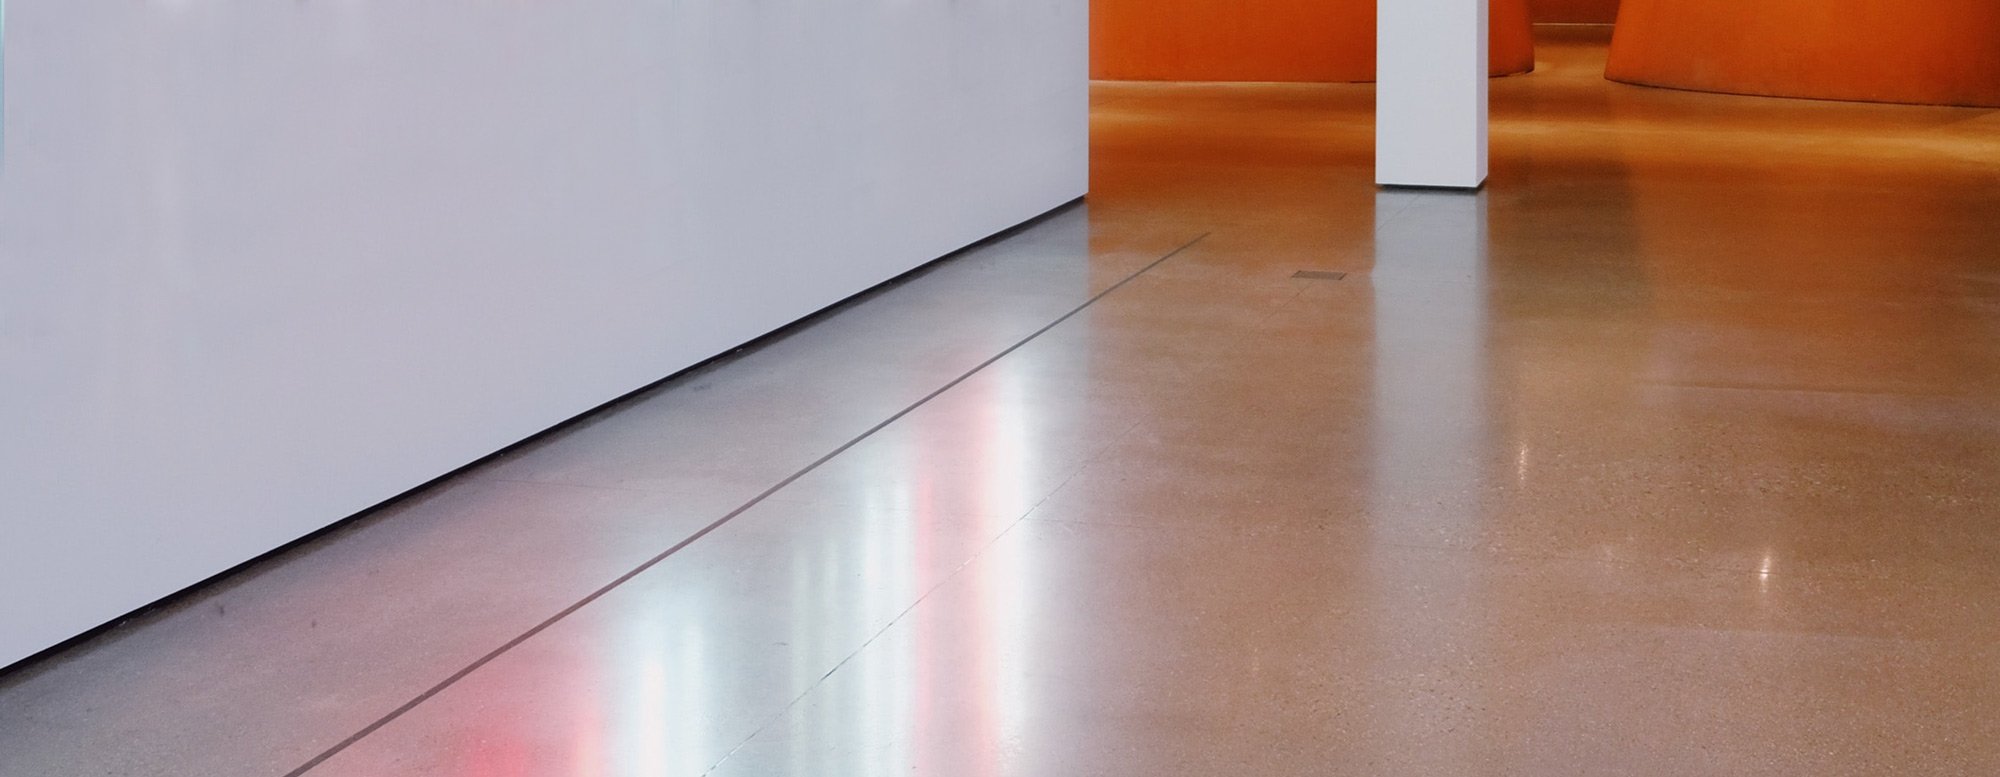 Pros And Cons Of Epoxy Flooring #keepProtocol